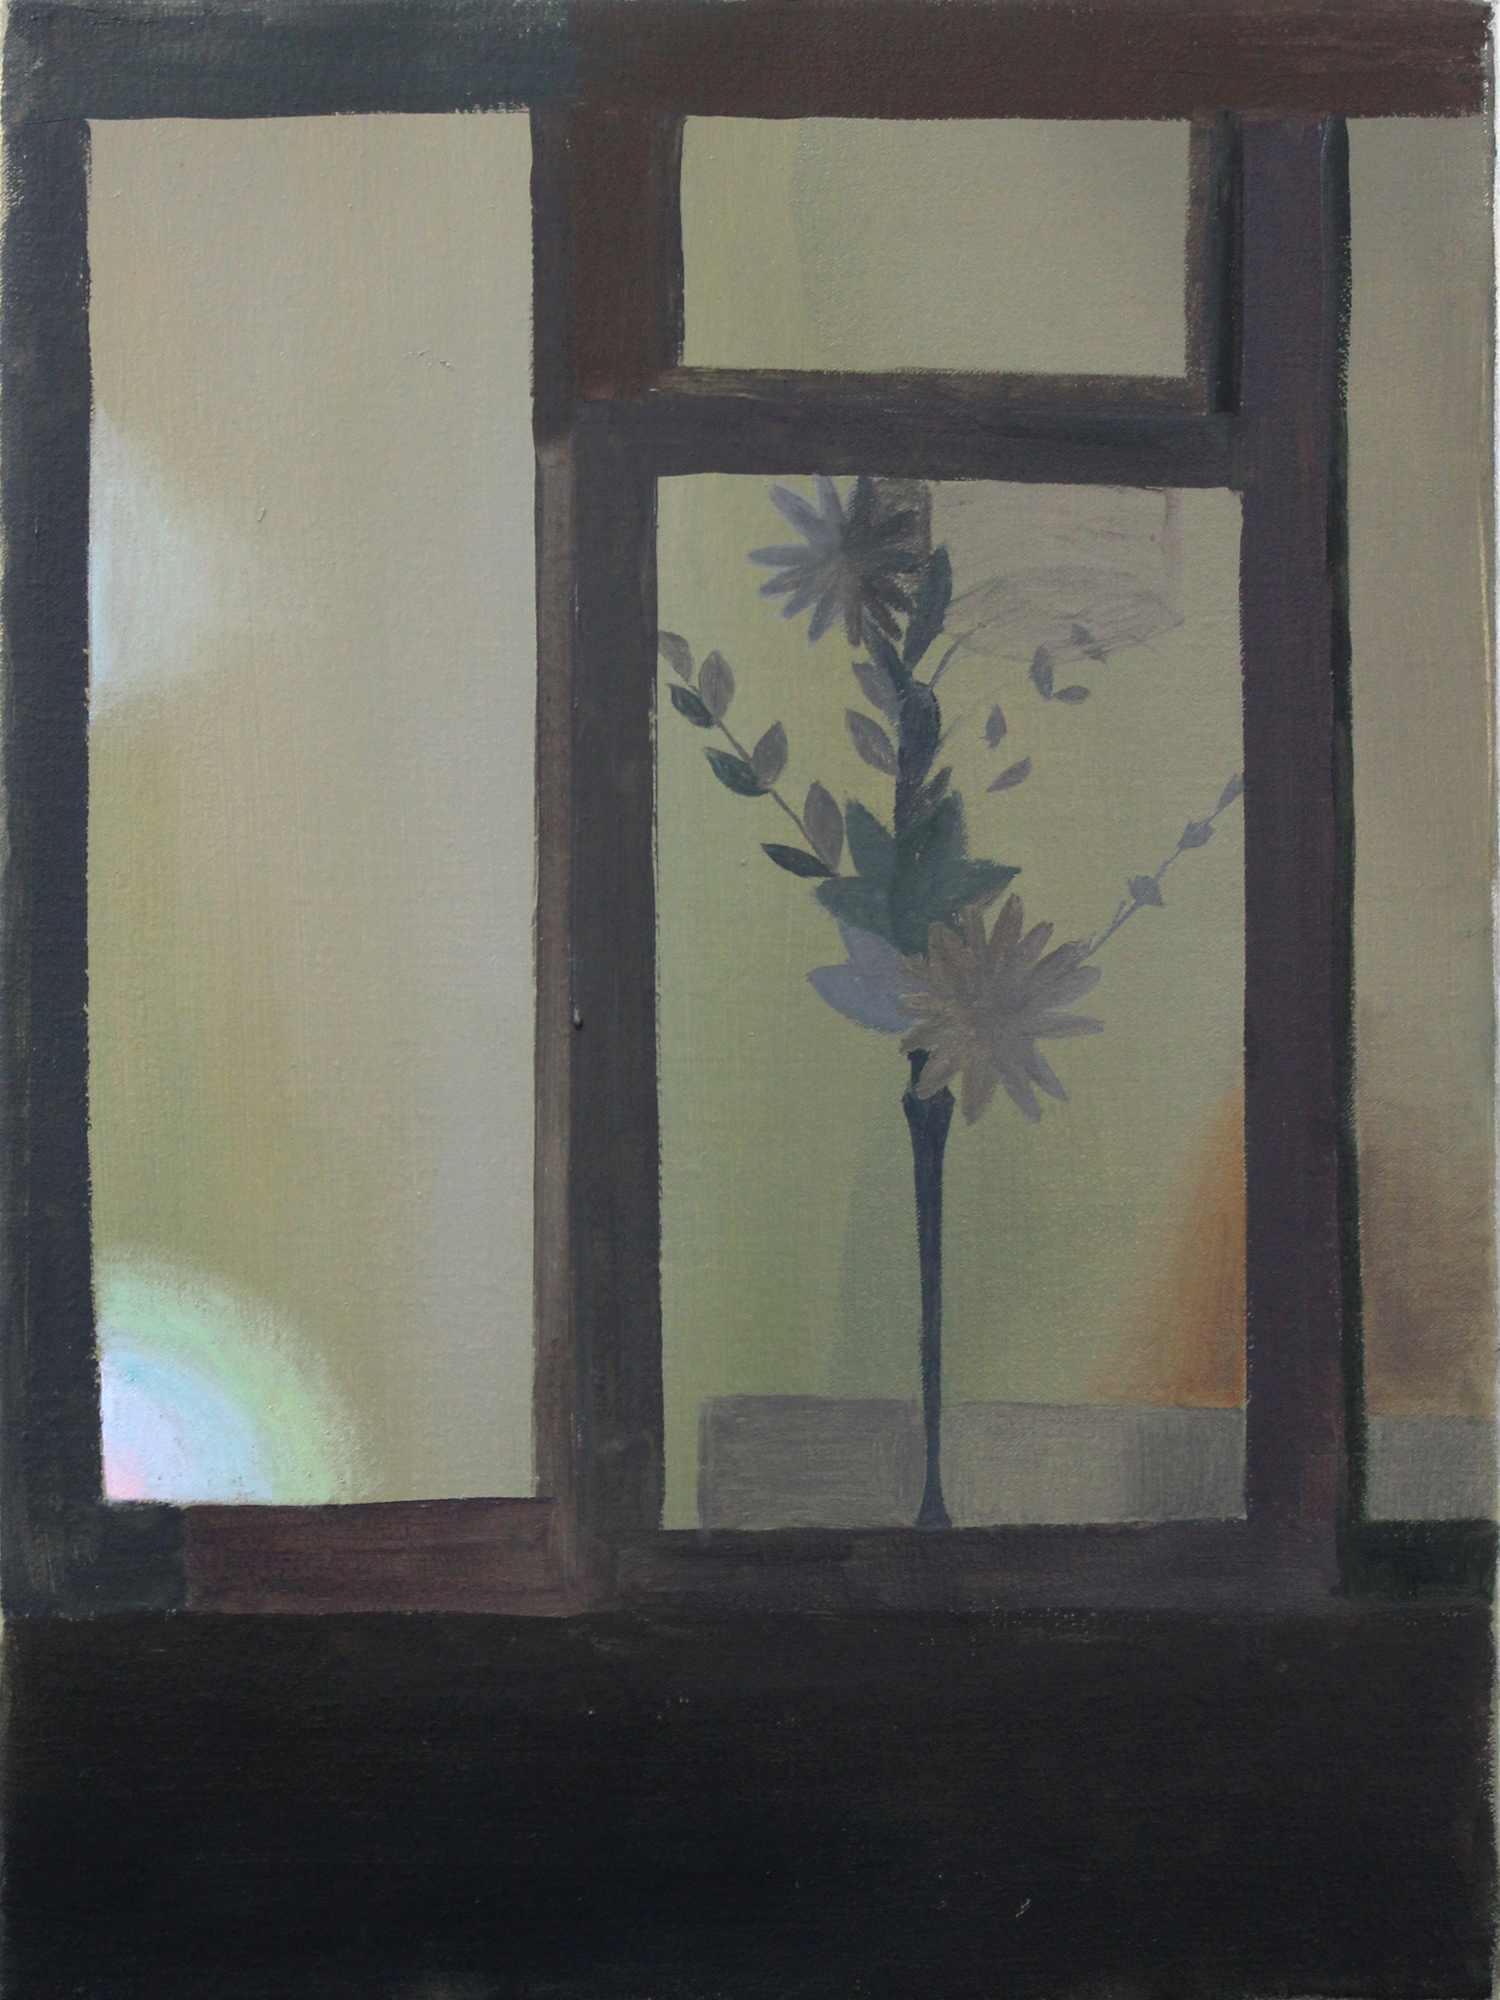   Flowers at Night    2015, oil on canvas, 40 x 30cm  